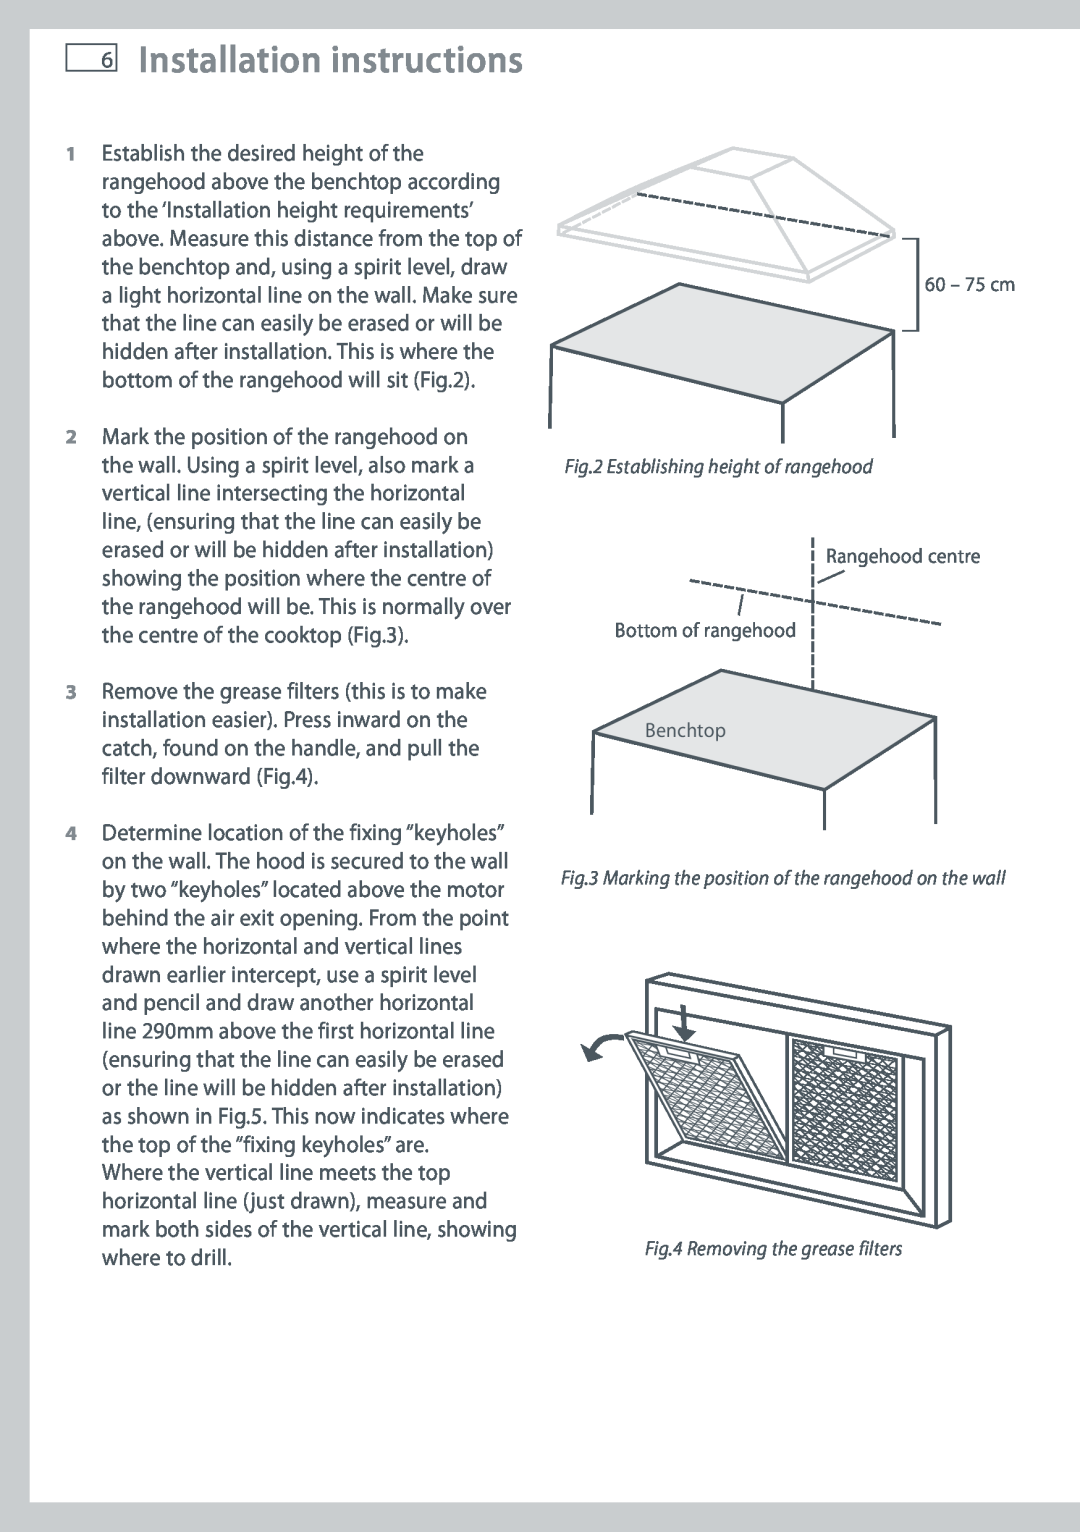 Fisher & Paykel HC60PCHTX1 Installation instructions, Establishing height of rangehood, Removing the grease filters 